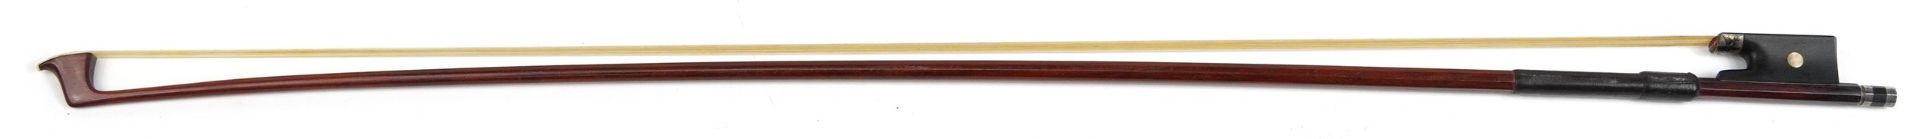 Old wooden violin bow with white metal mounts and mother of pearl frog impressed Walter Zapf, 75cm - Image 2 of 4